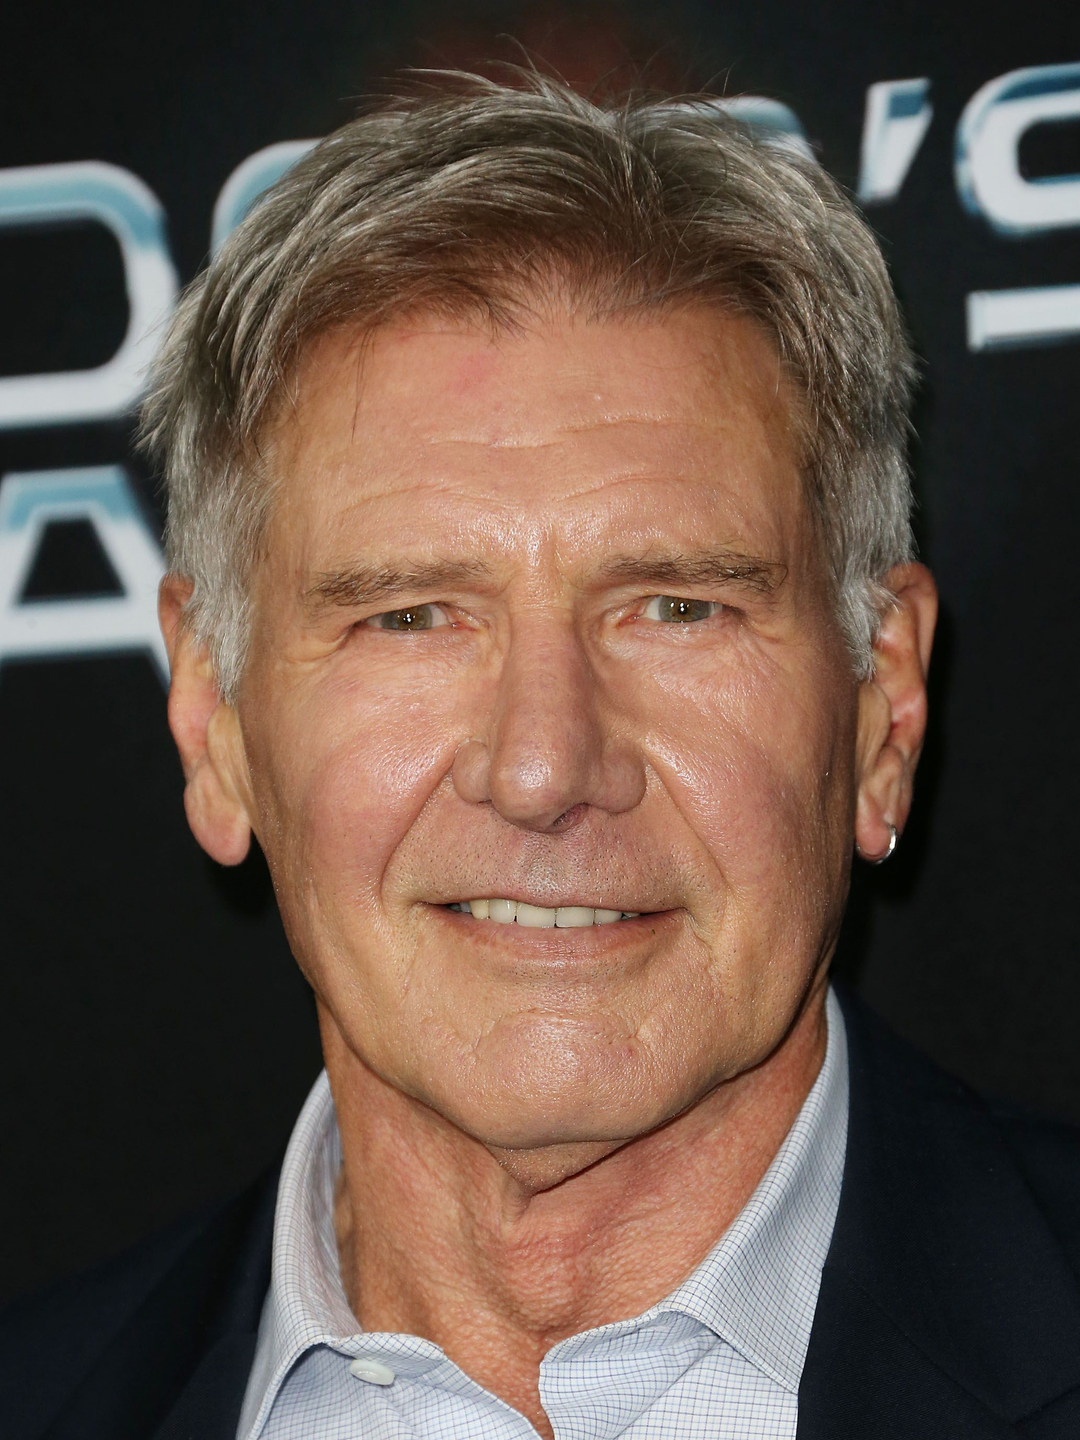 Harrison Ford who is he